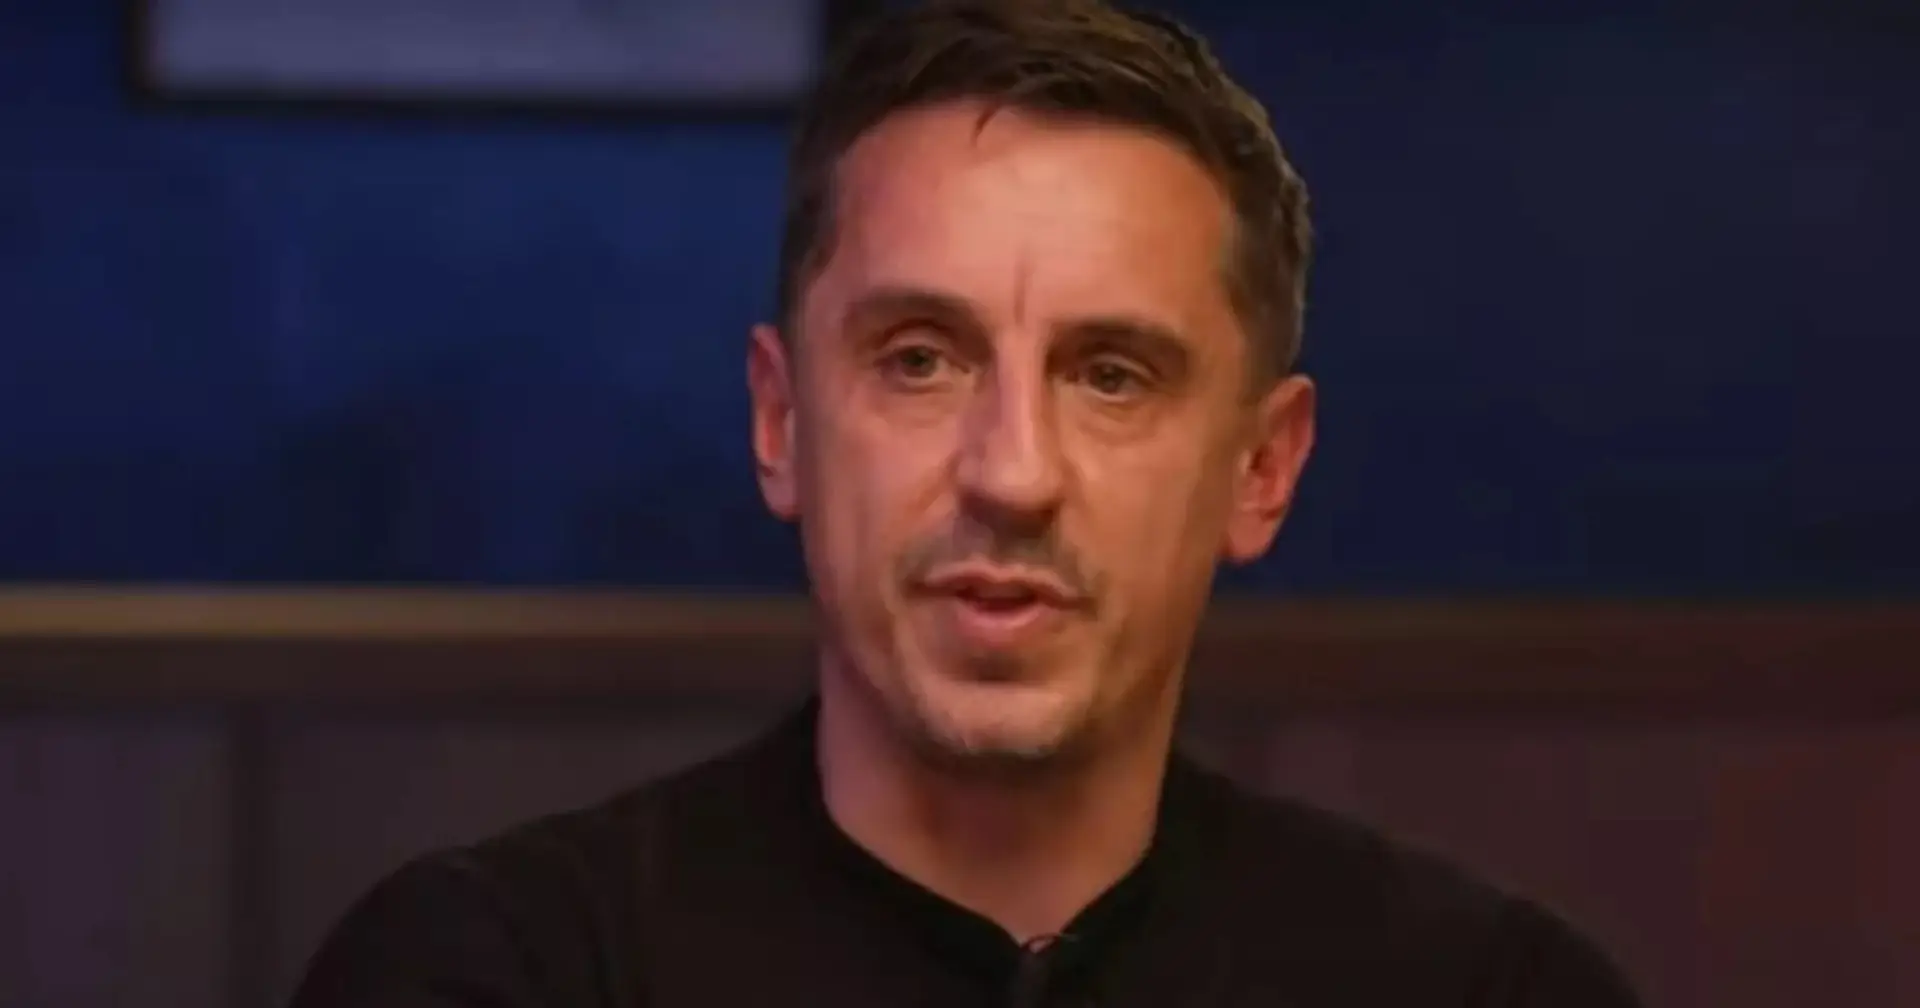 'Arsenal should win but there's a madness': Gary Neville explains why Man United can get points on Sunday